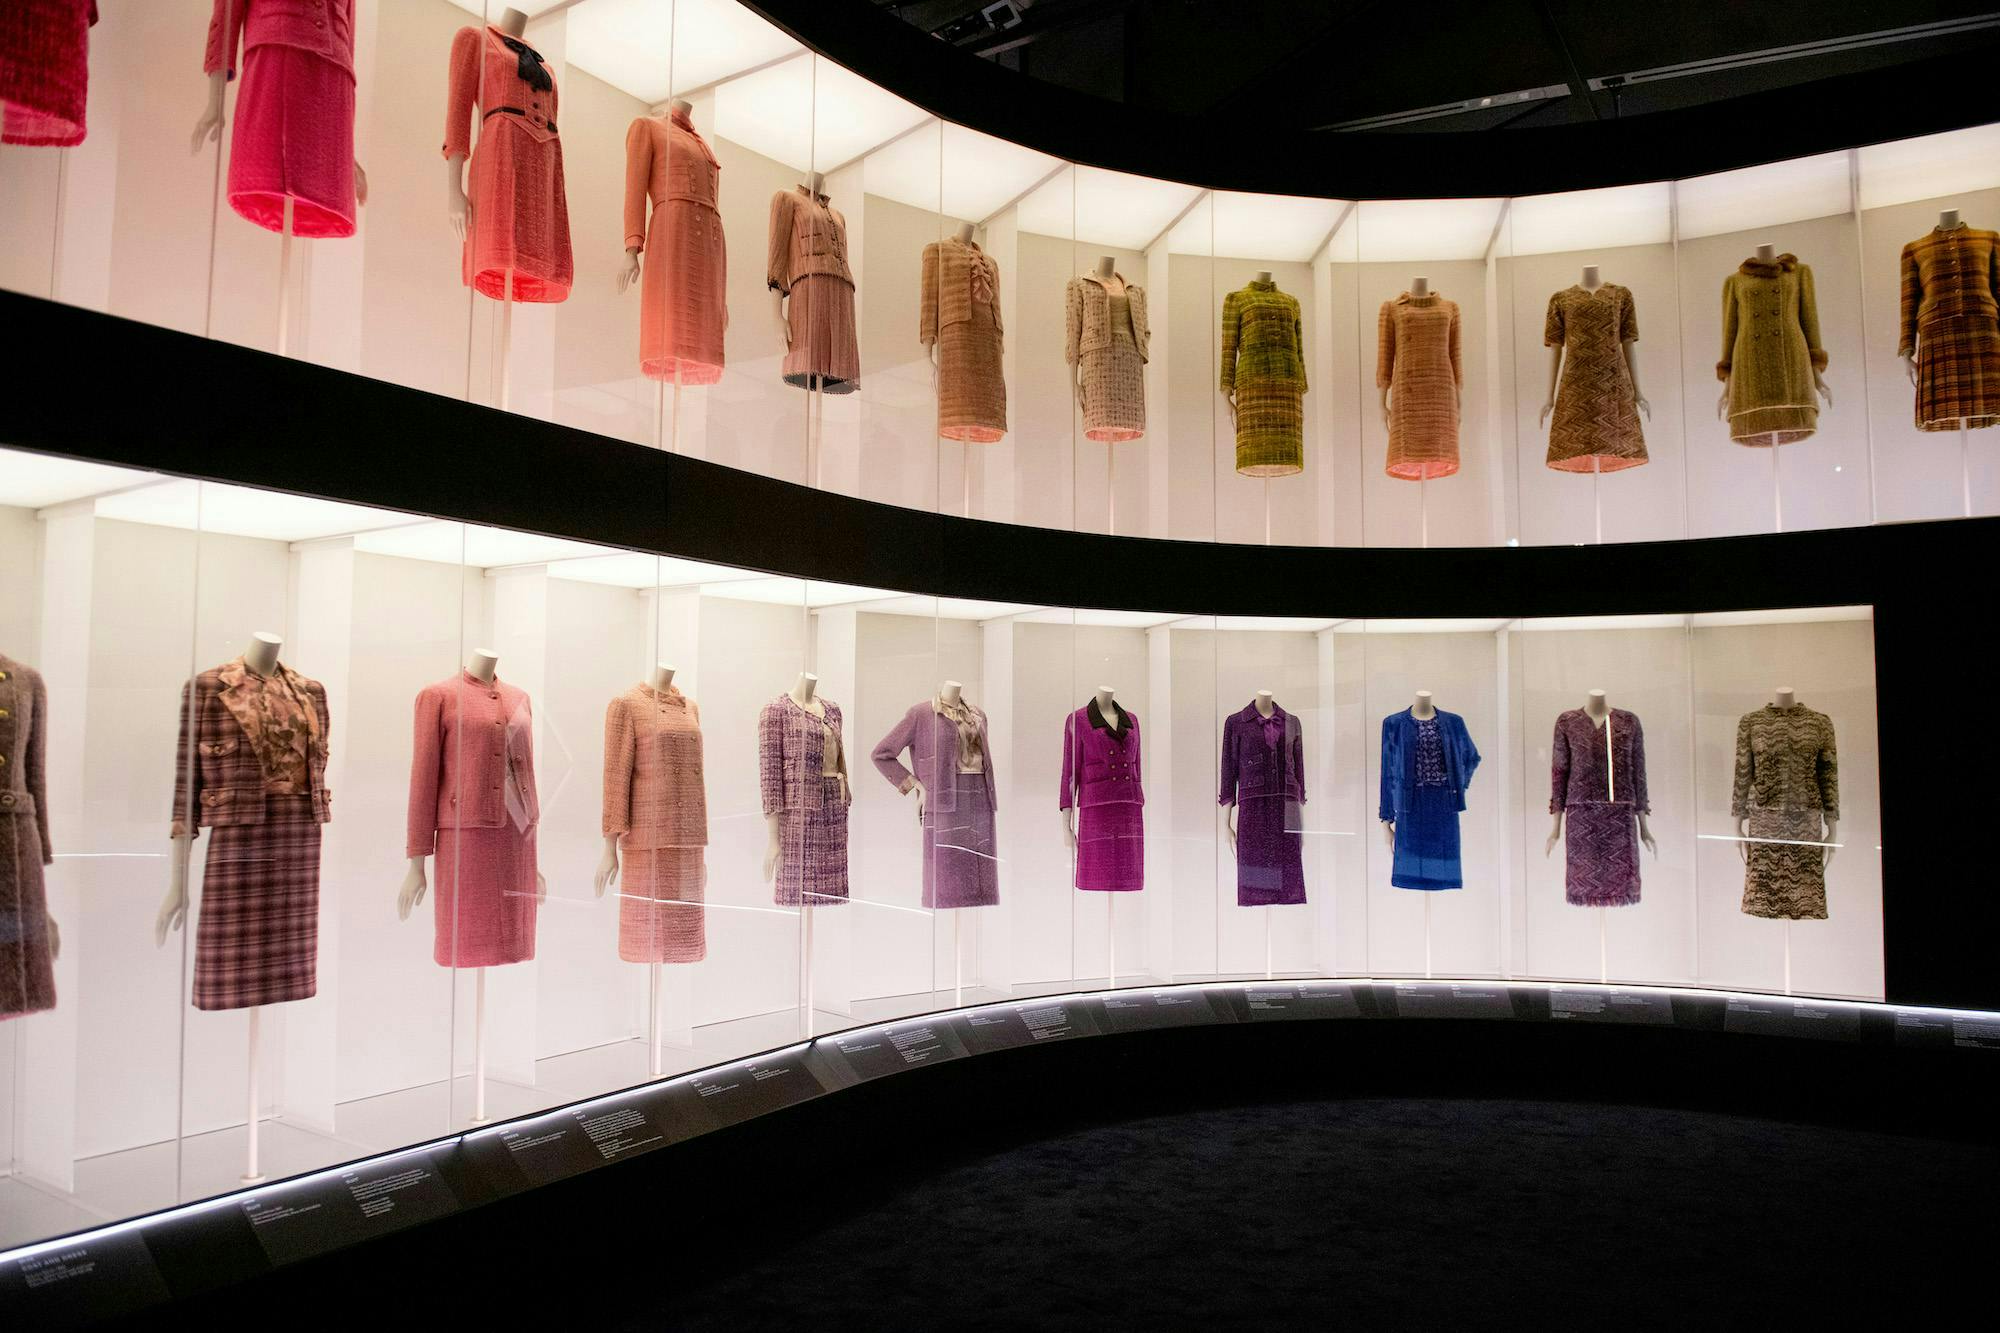 Dresses on display in 'Gabrielle Chanel, Fashion Manifesto' at the Victoria and Albert Museum in London. Photo: © Chanel.